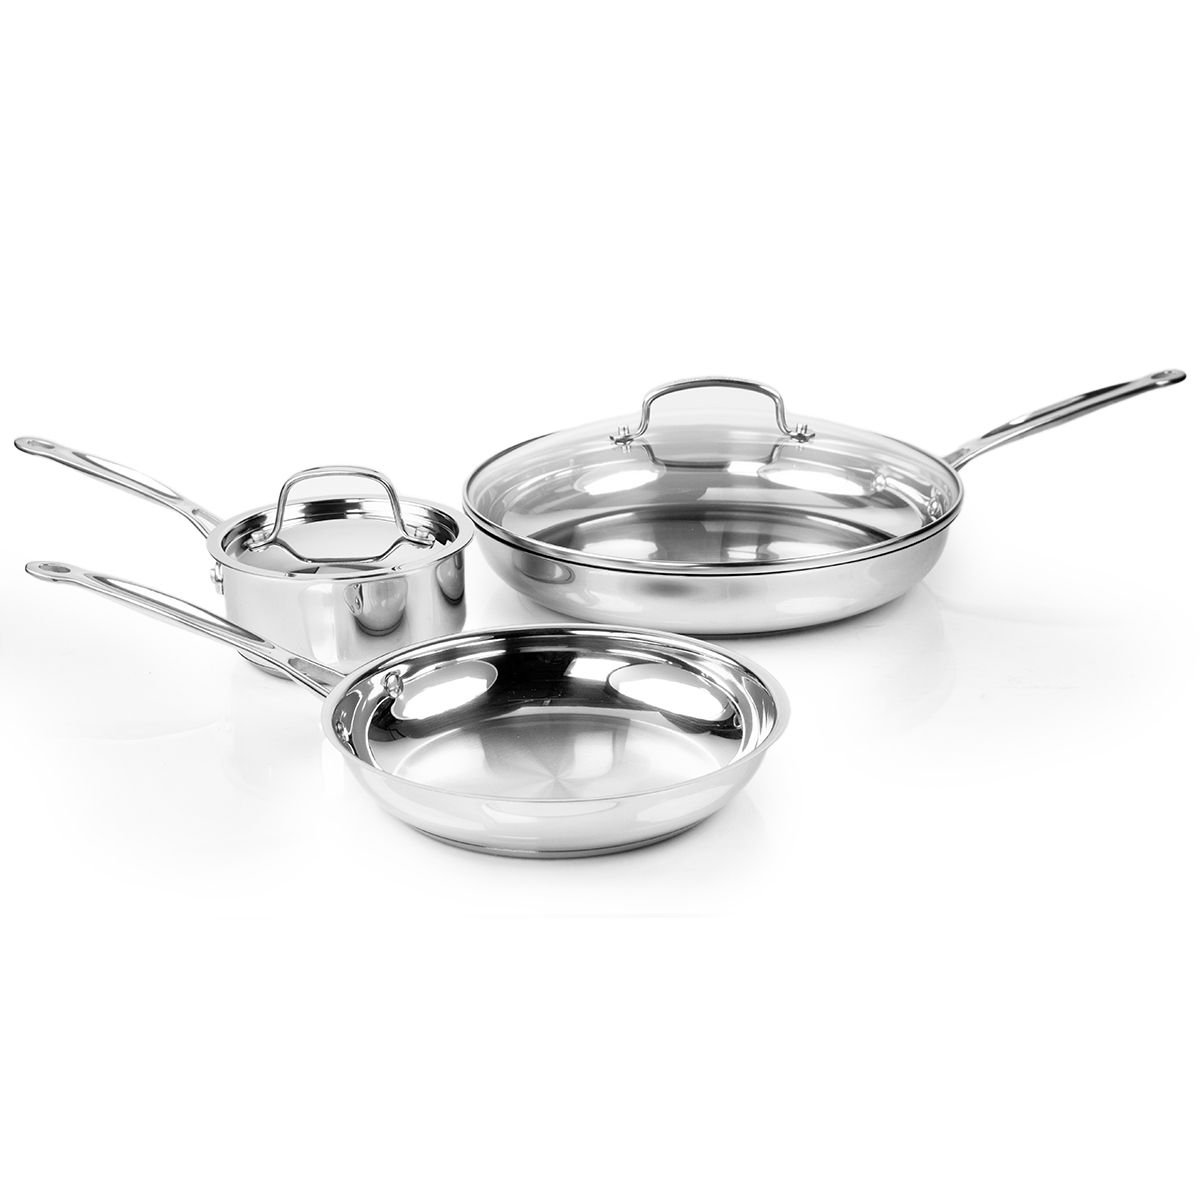 Cuisinart Chef's Classic 7 Piece Stainless Steel Cookware Set